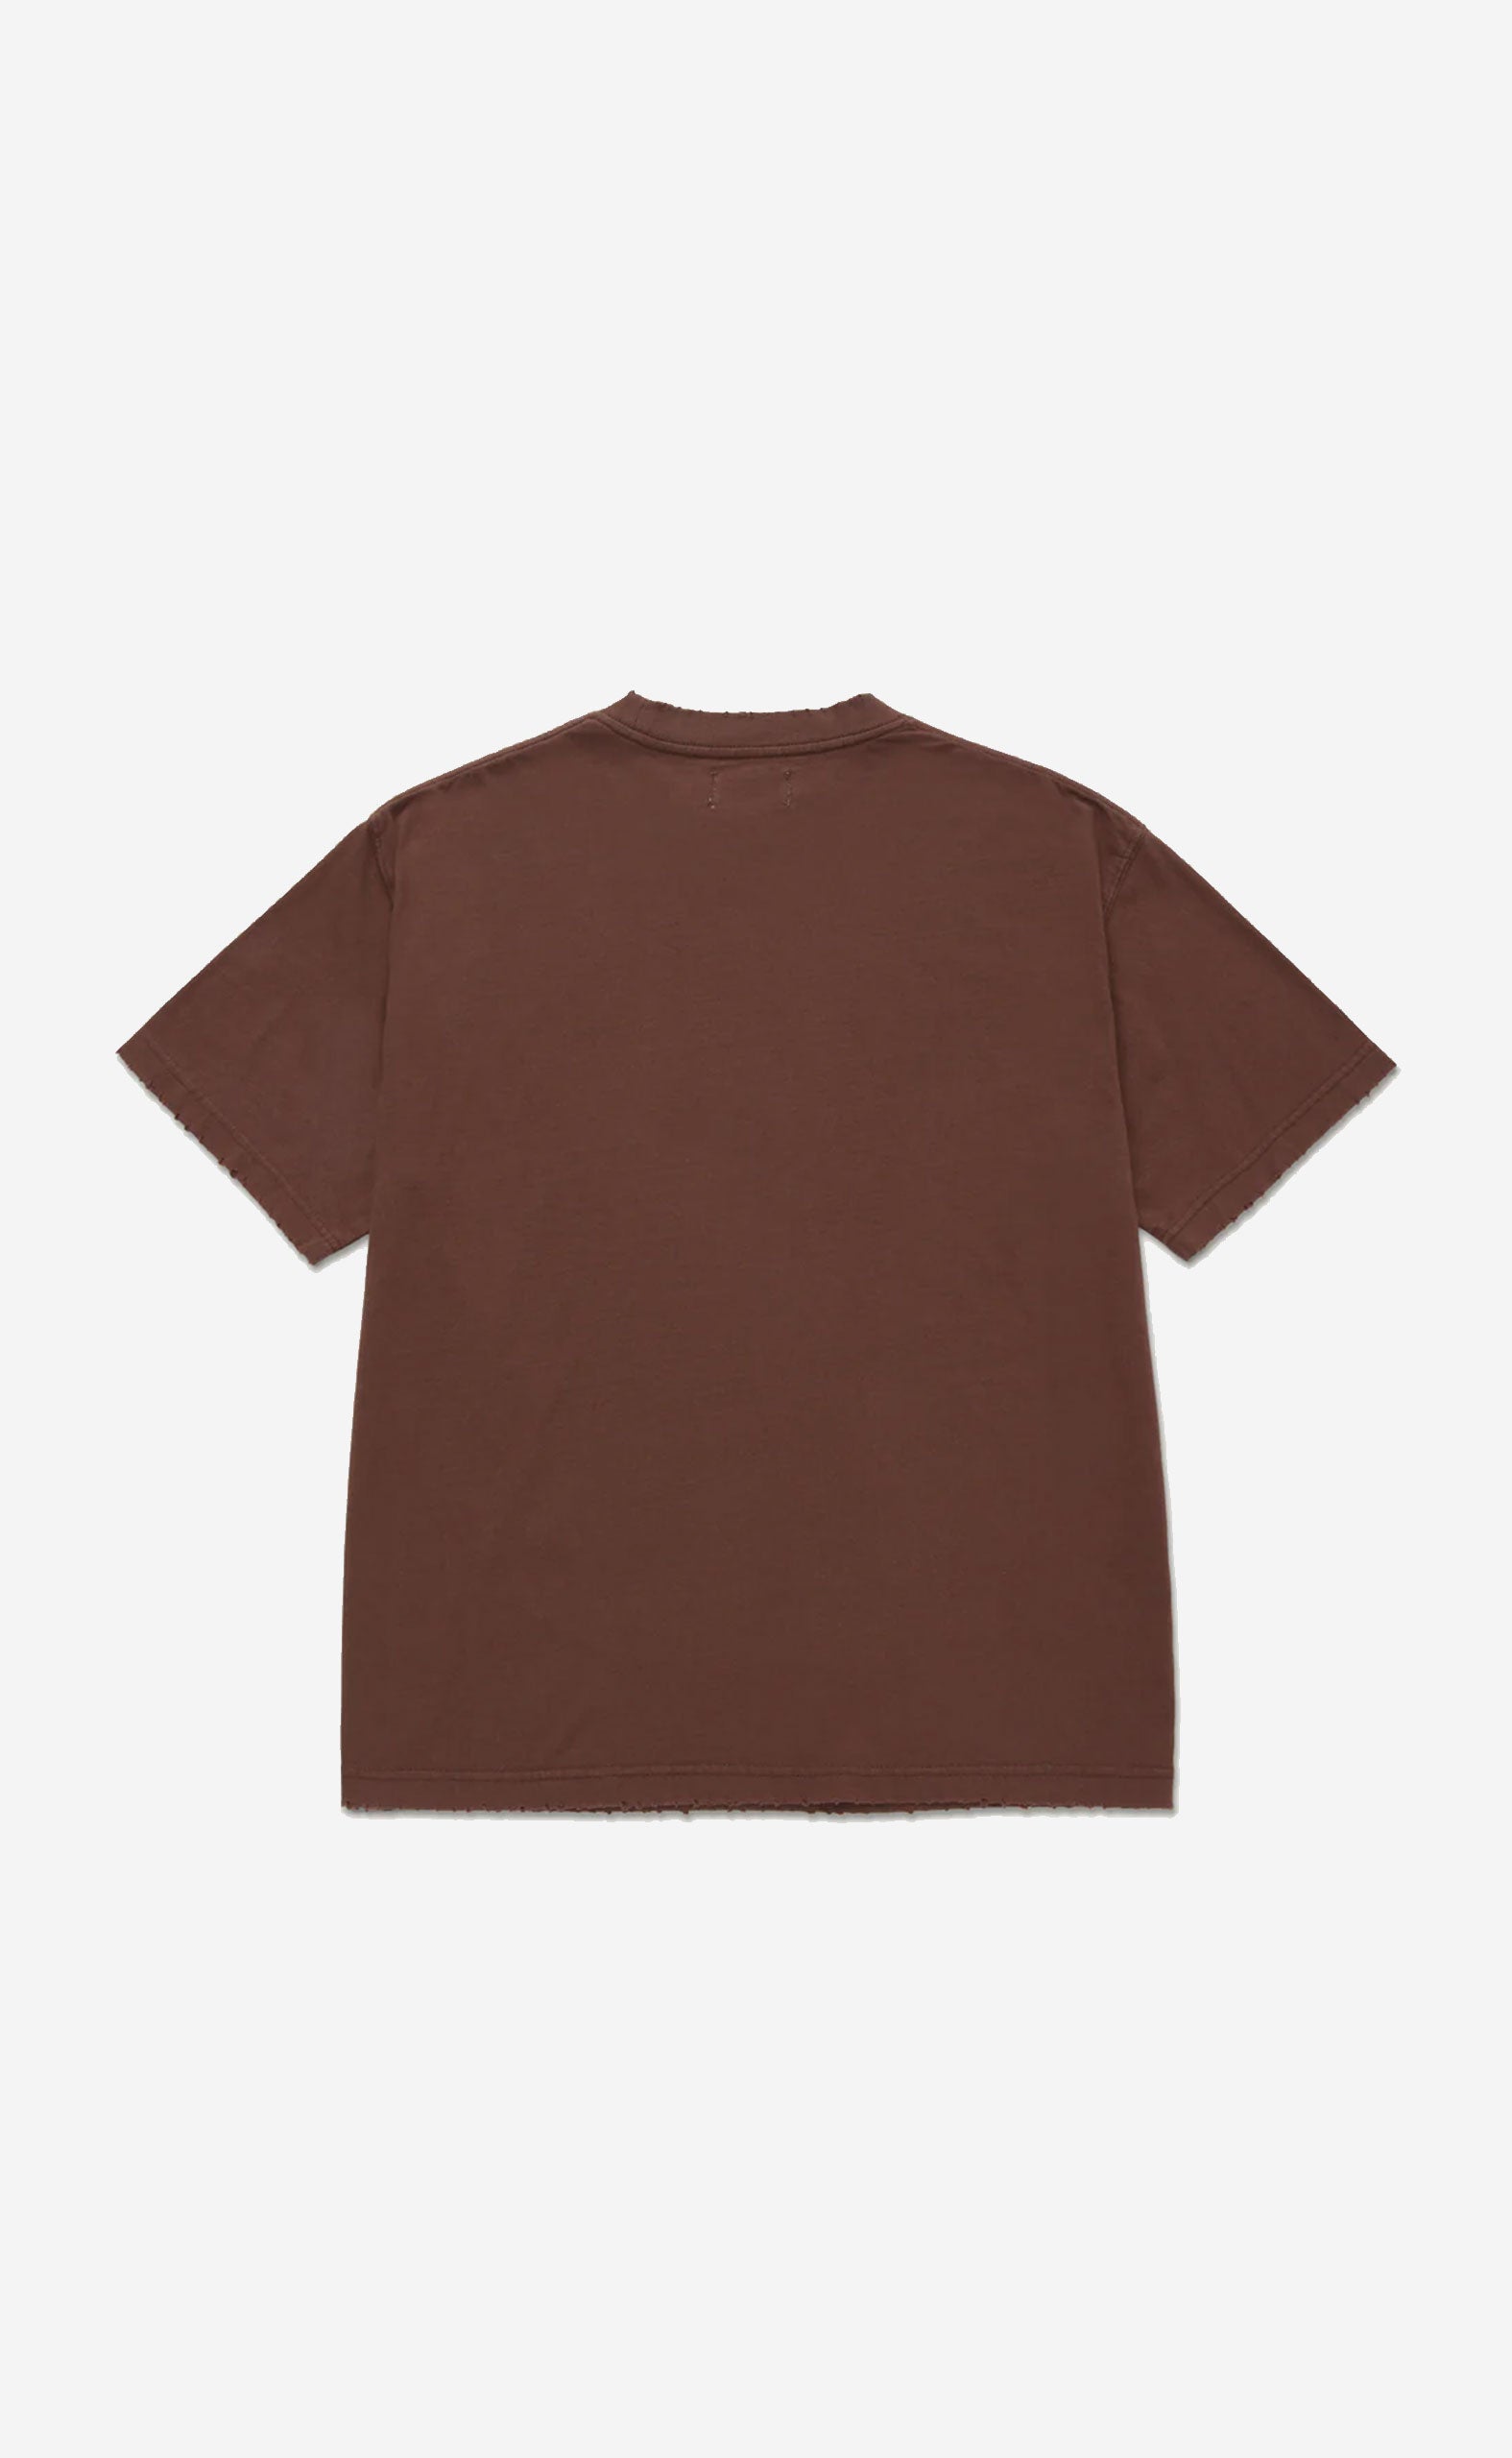 BROWN C-FALL MYSTERY OF PAIN TEE